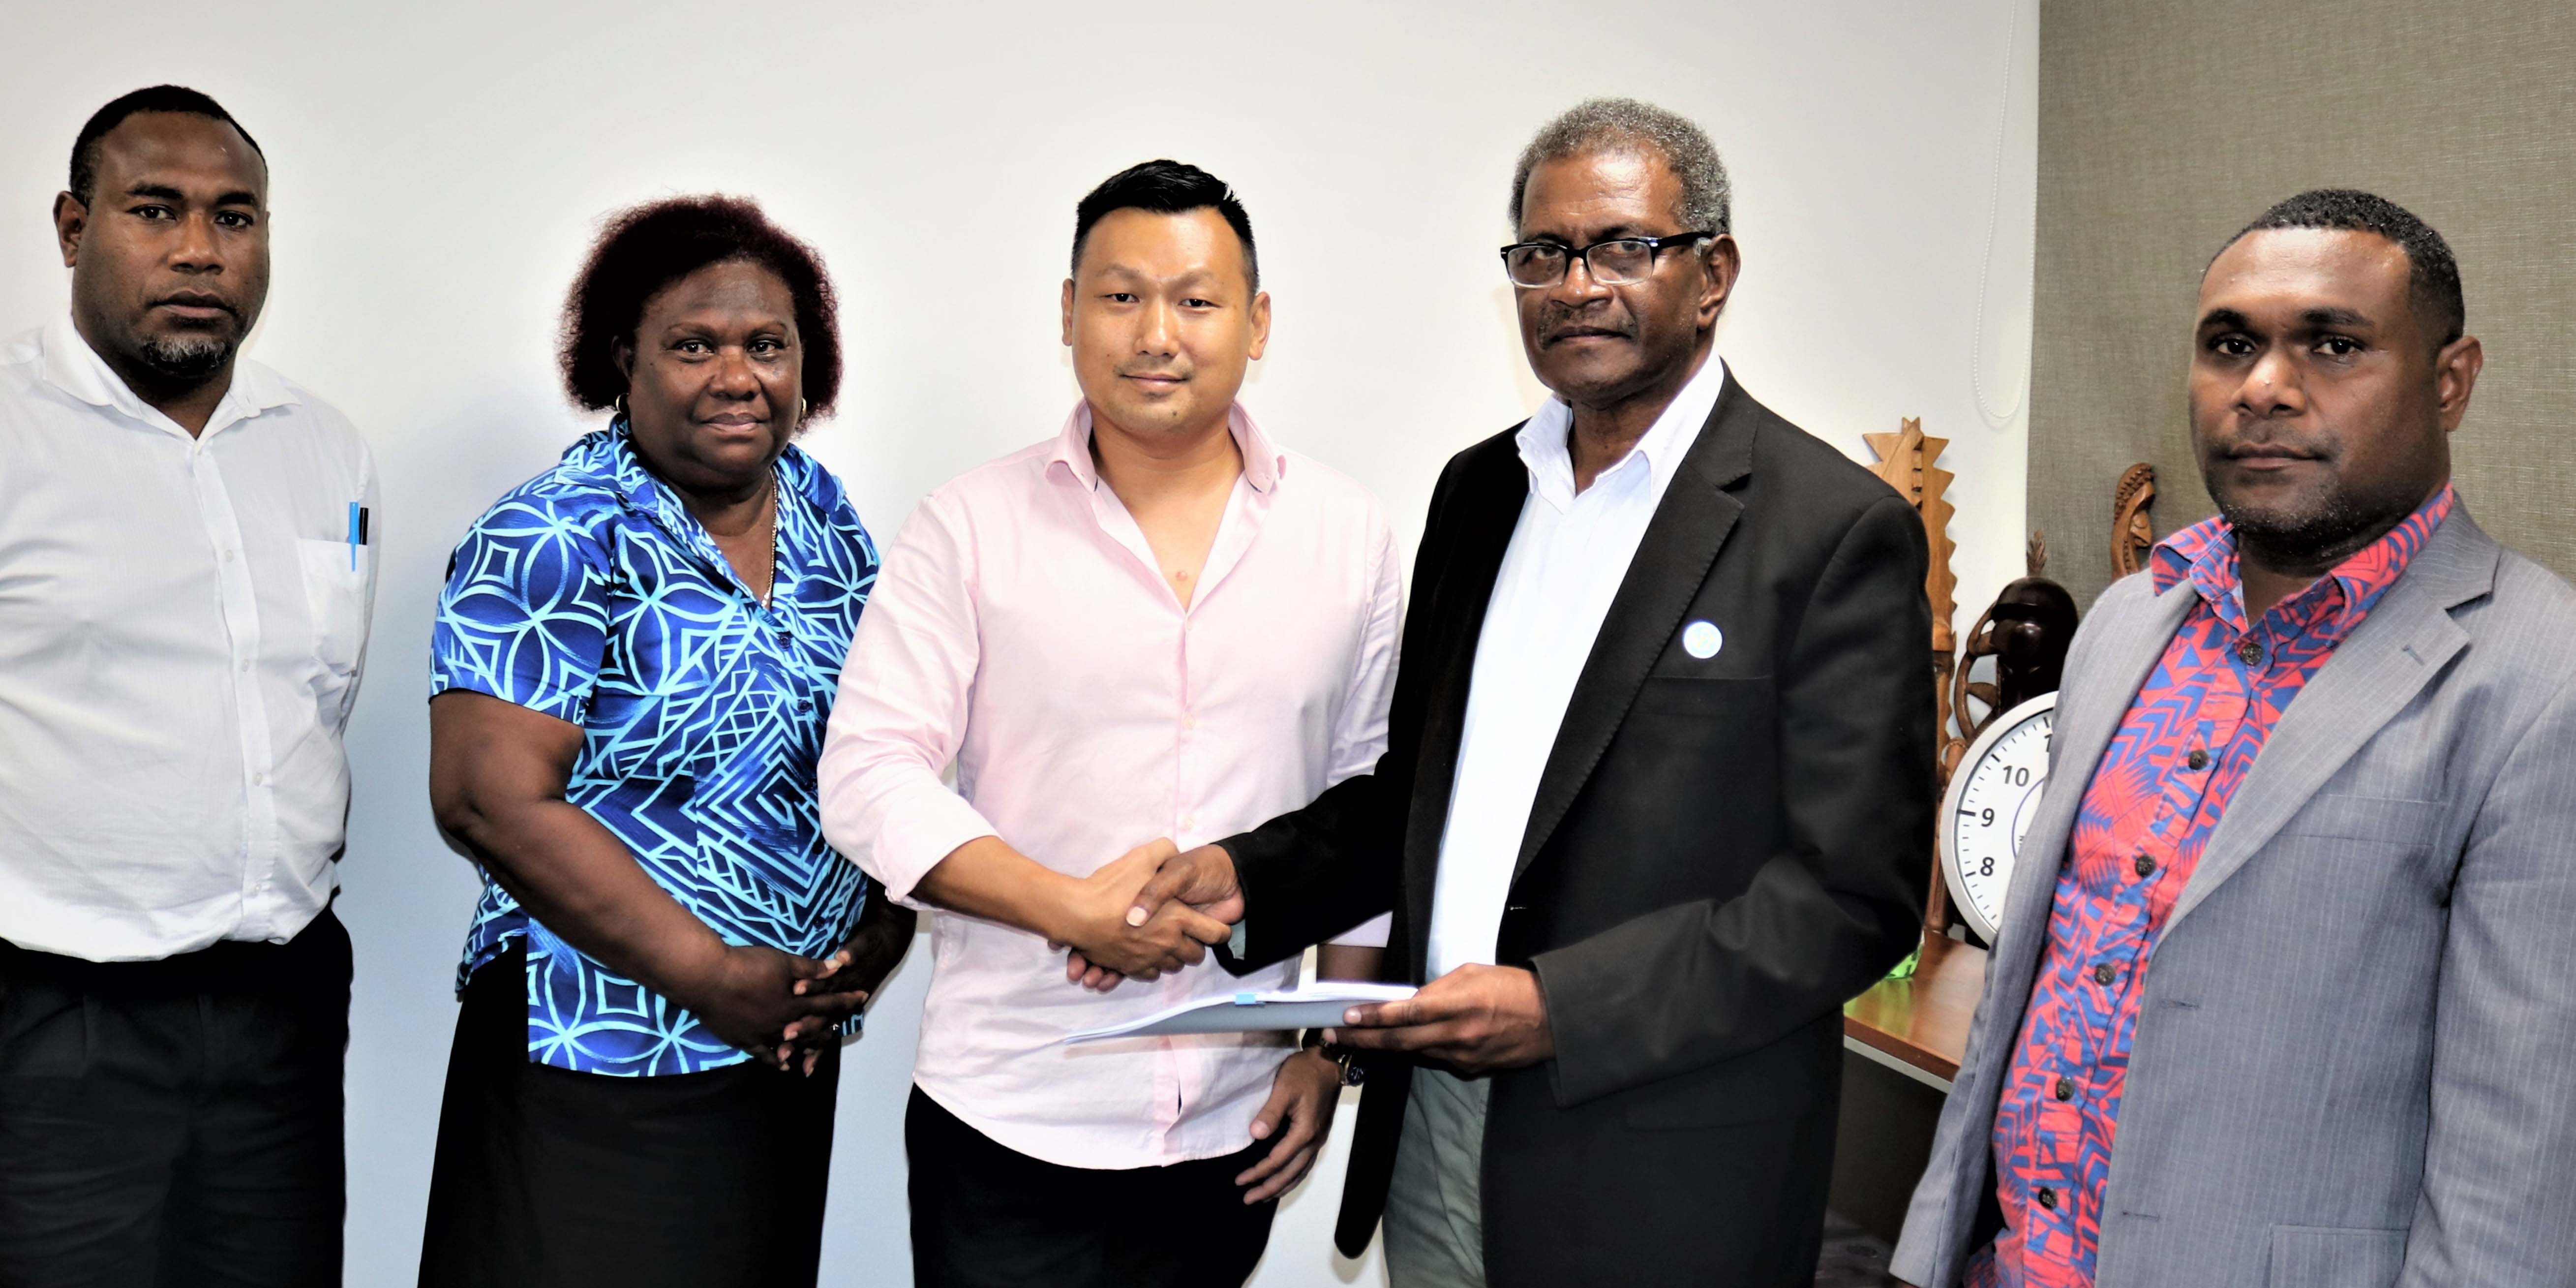 Managing Director and owner of Private Islands Investments Limited Mr David Leong shaking hands on the deal with the CEO/GM of SINPF Mr. Mike Wate. Looking on are senior officials of the Fund; Board Secretary Ms Ruth Alepio, Manager Legal Services Mr Stanley Hanu and PIIL Legal Counsel Mr. Donald Marahare